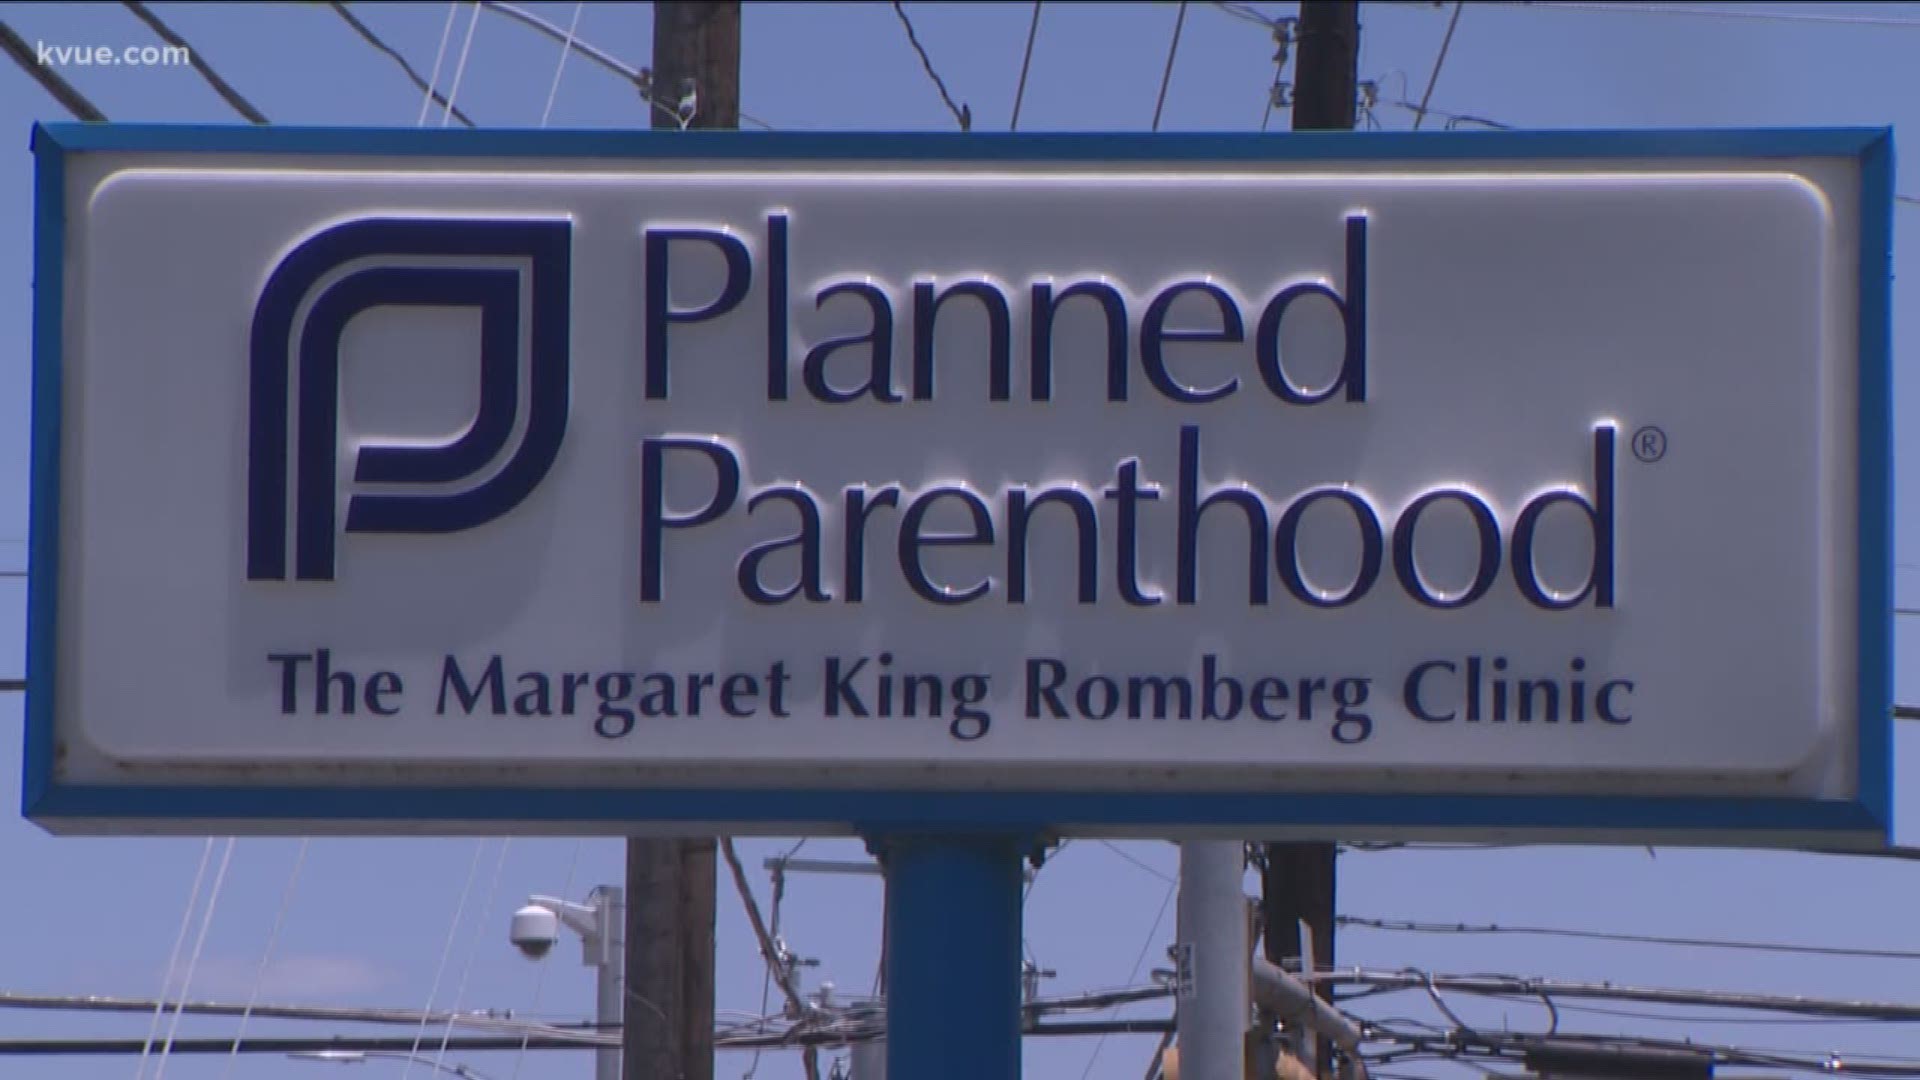 Despite a new law, it looks like Austin's Planned Parenthood clinic will remain open.